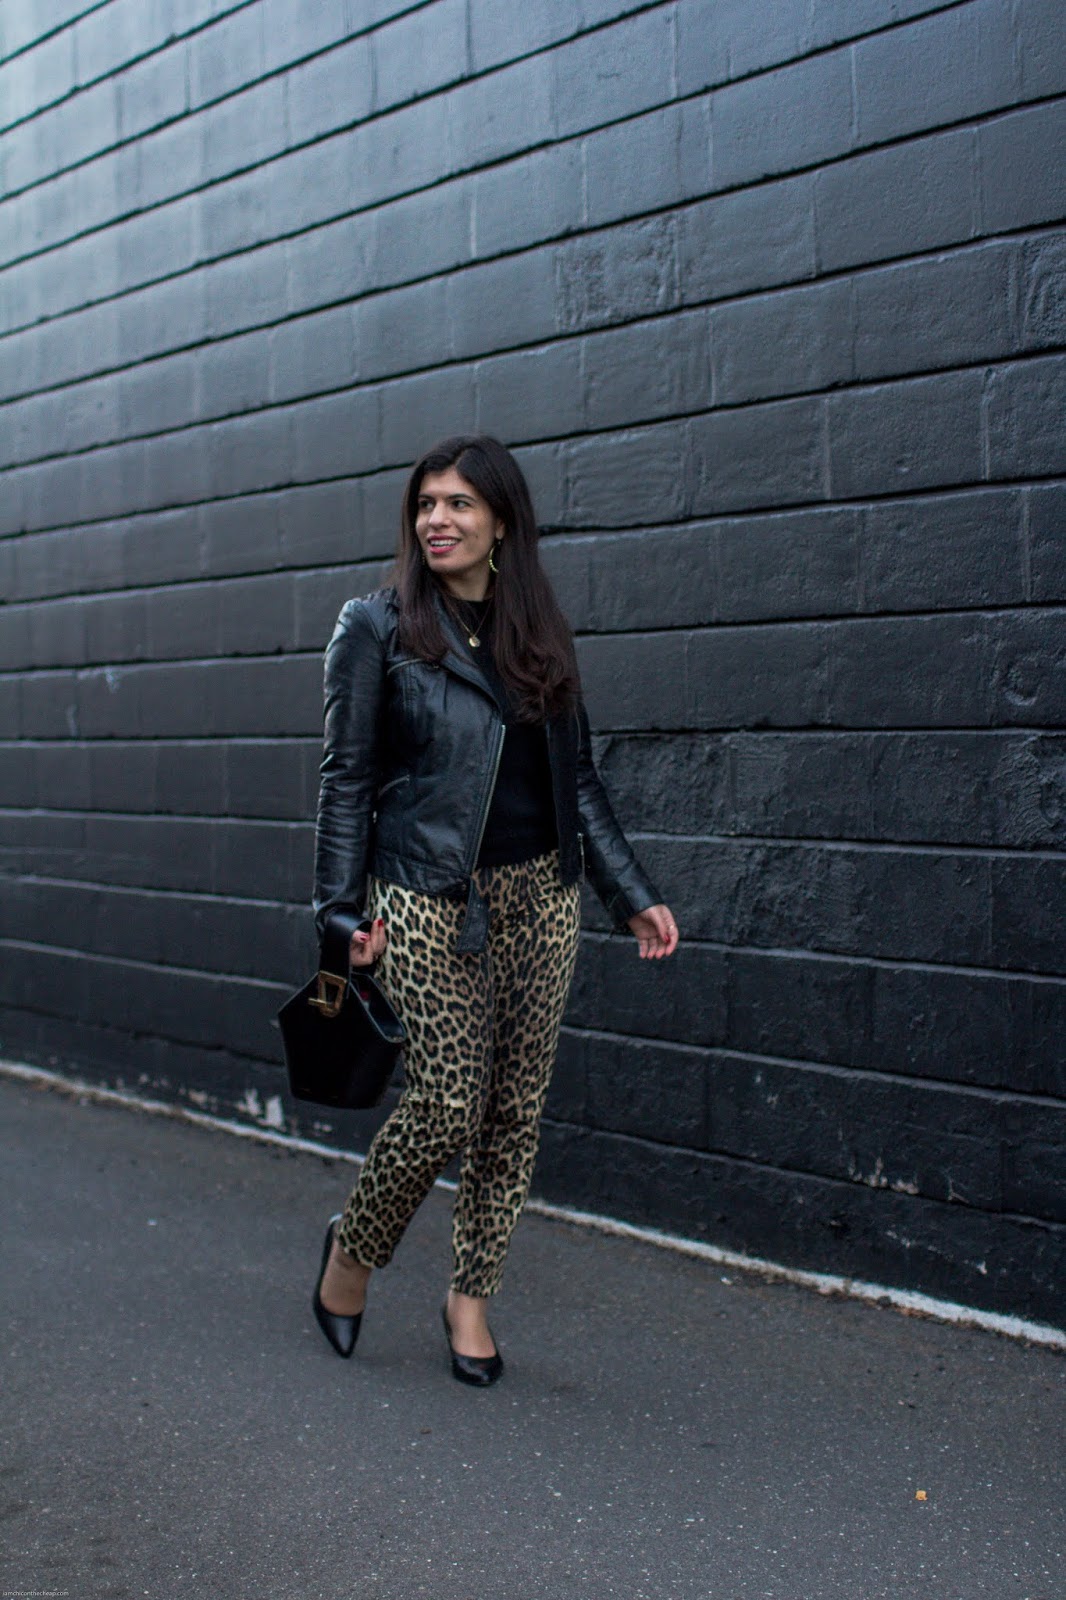 Alloy Keeping Us Rocker Chic with Tall Leopard Pants - The Real Tall